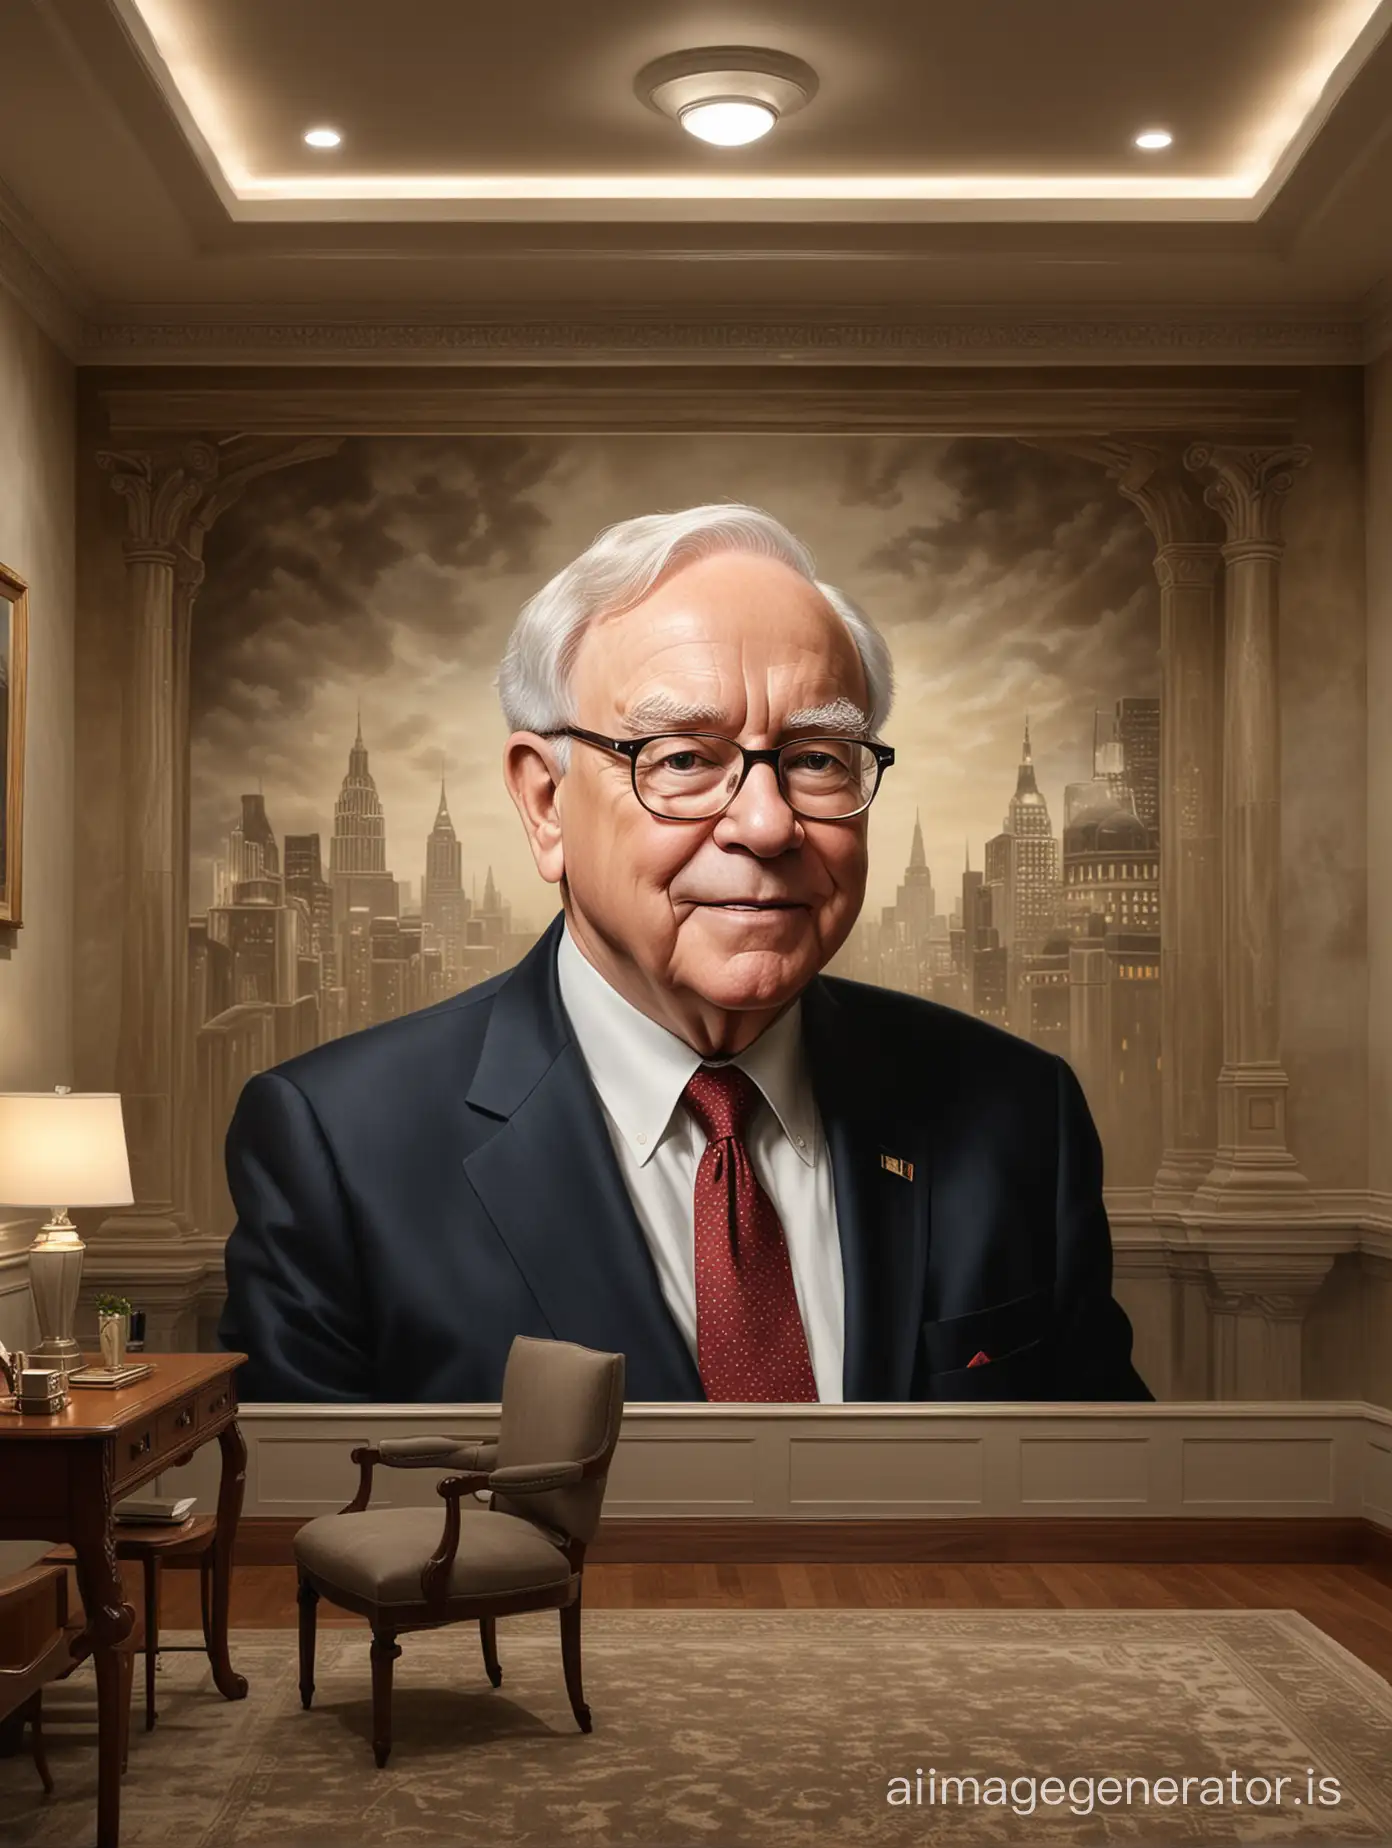 A highly realistic mural capturing Warren buffet in an elegant, dimly lit study, in mid-conversation, with the ambiance of the room reflecting a sense of future possibilities, hyper realistic, ultra realistic details